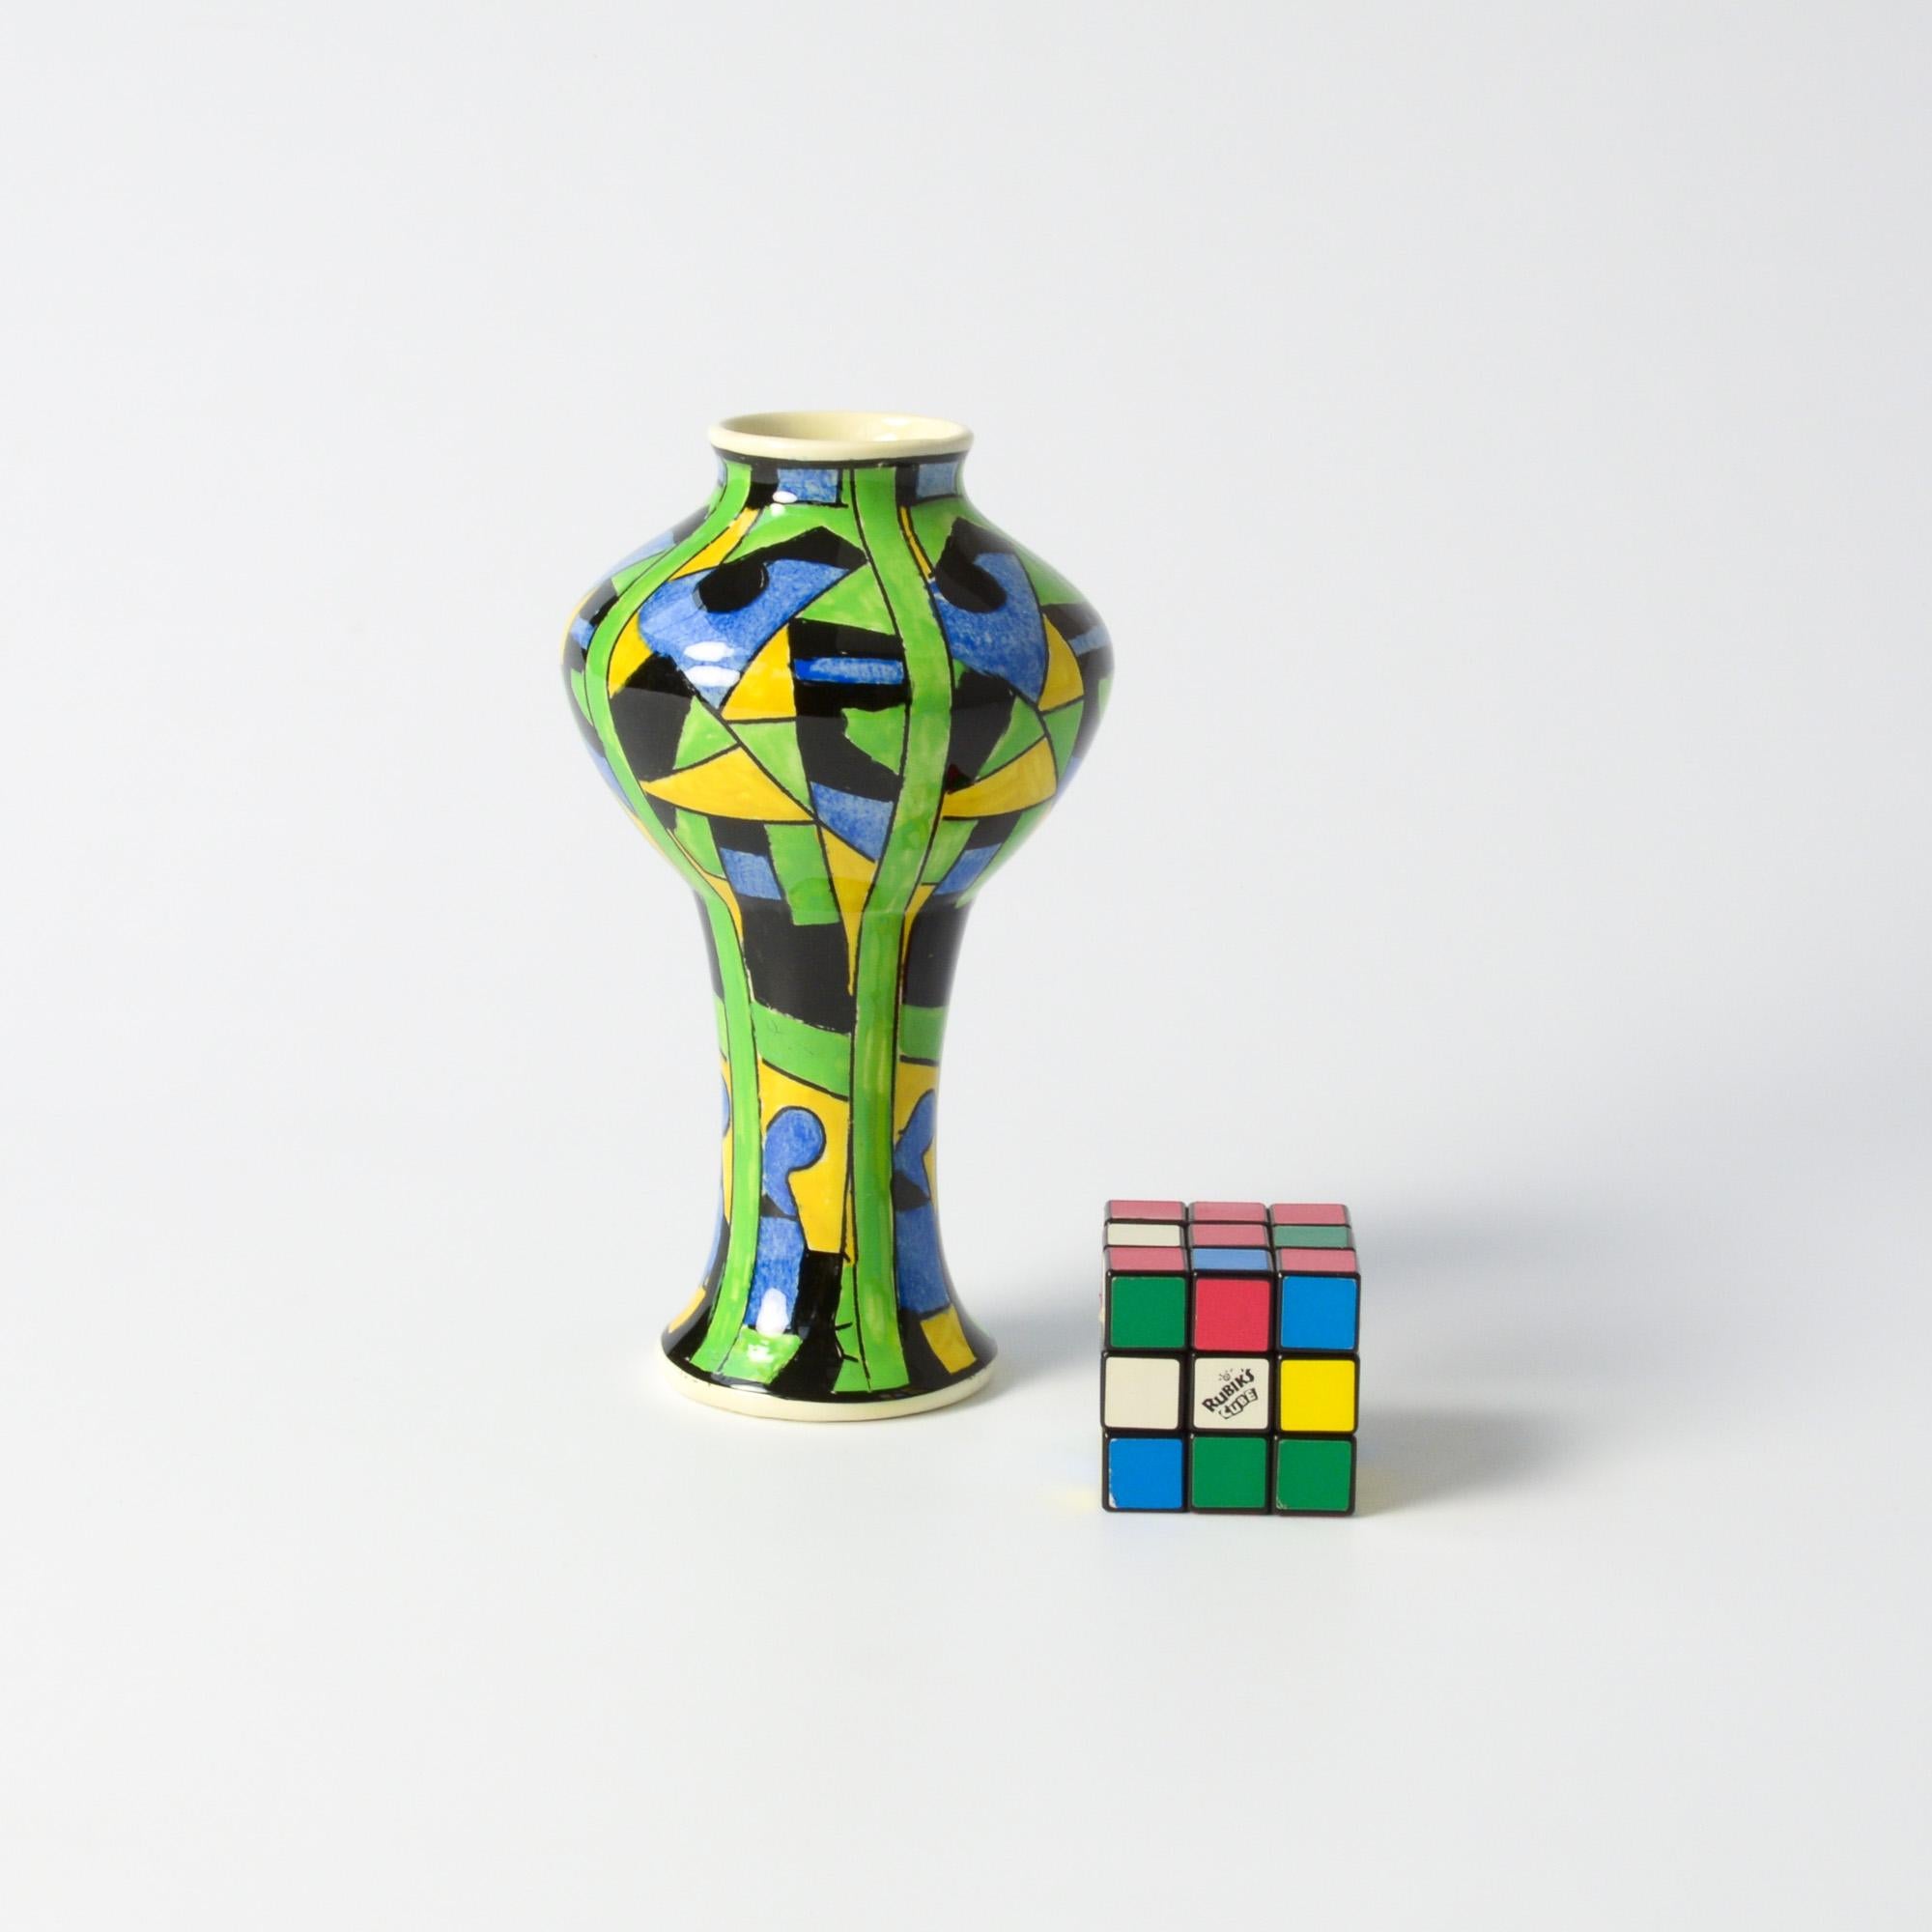 This polychrome vase was designed by Charles Catteau for Boch Freres.
The polychrome design with geometric patterns (D873) and the beautiful shape make this small vase extraordinary.
This Art Deco vase can be dated in 1924. It is in very good